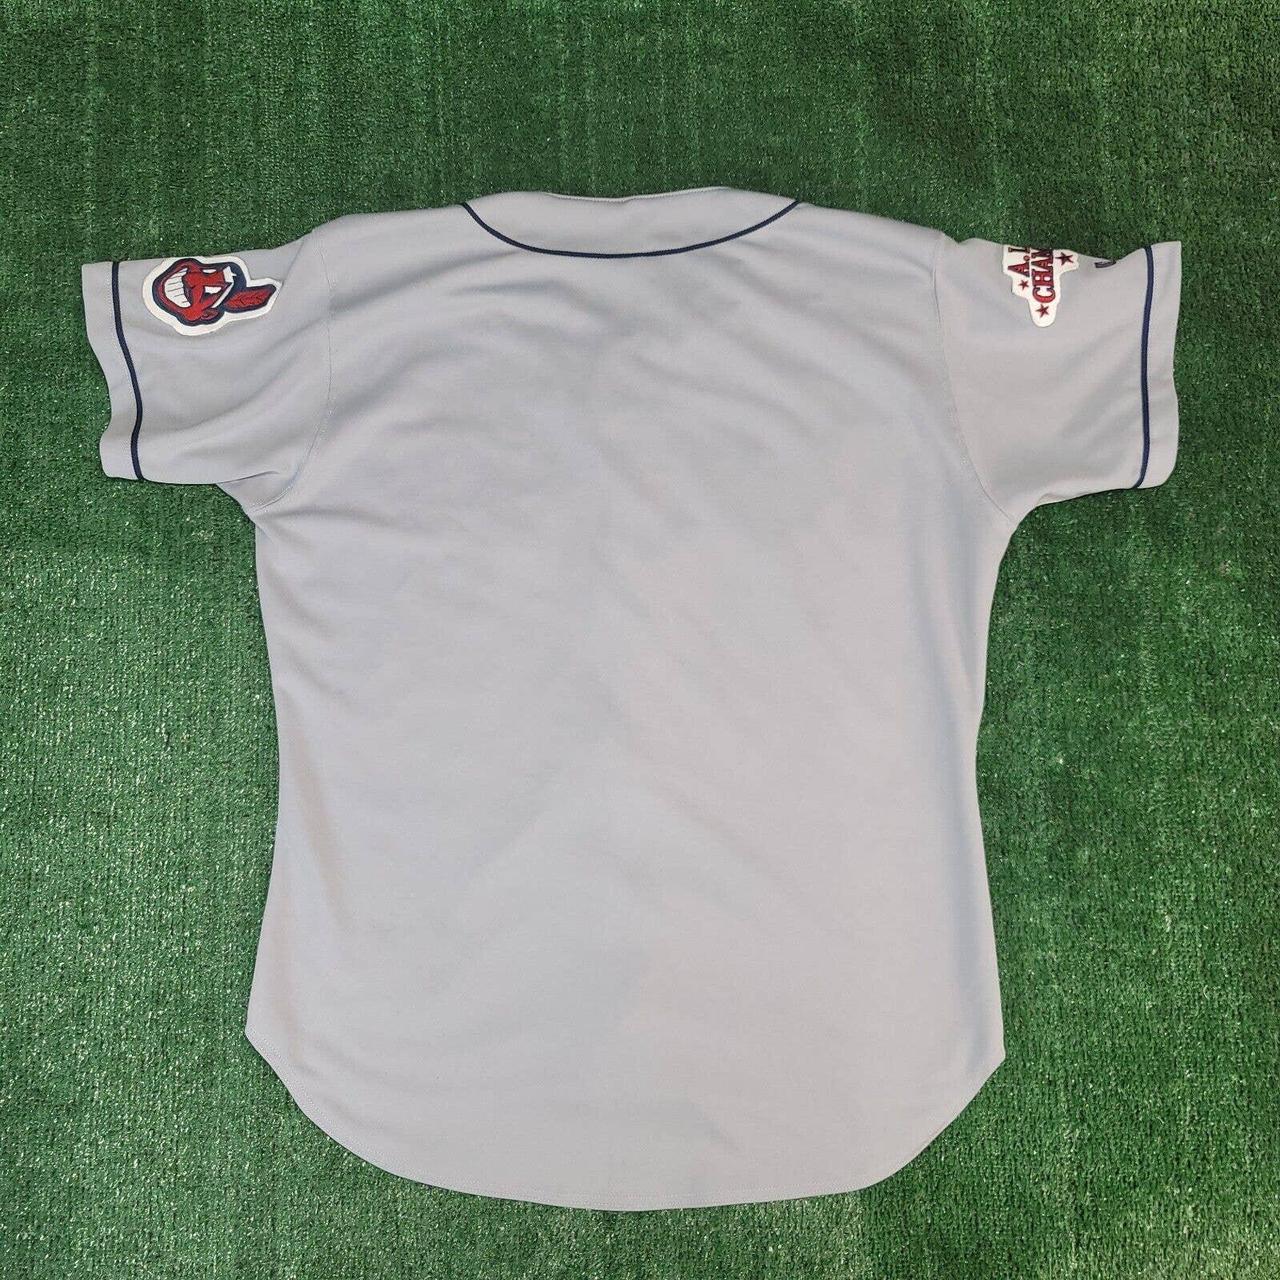 USED RUSSELL CLEVELAND INDIANS T-SHIRT JERSEY SIZE XL